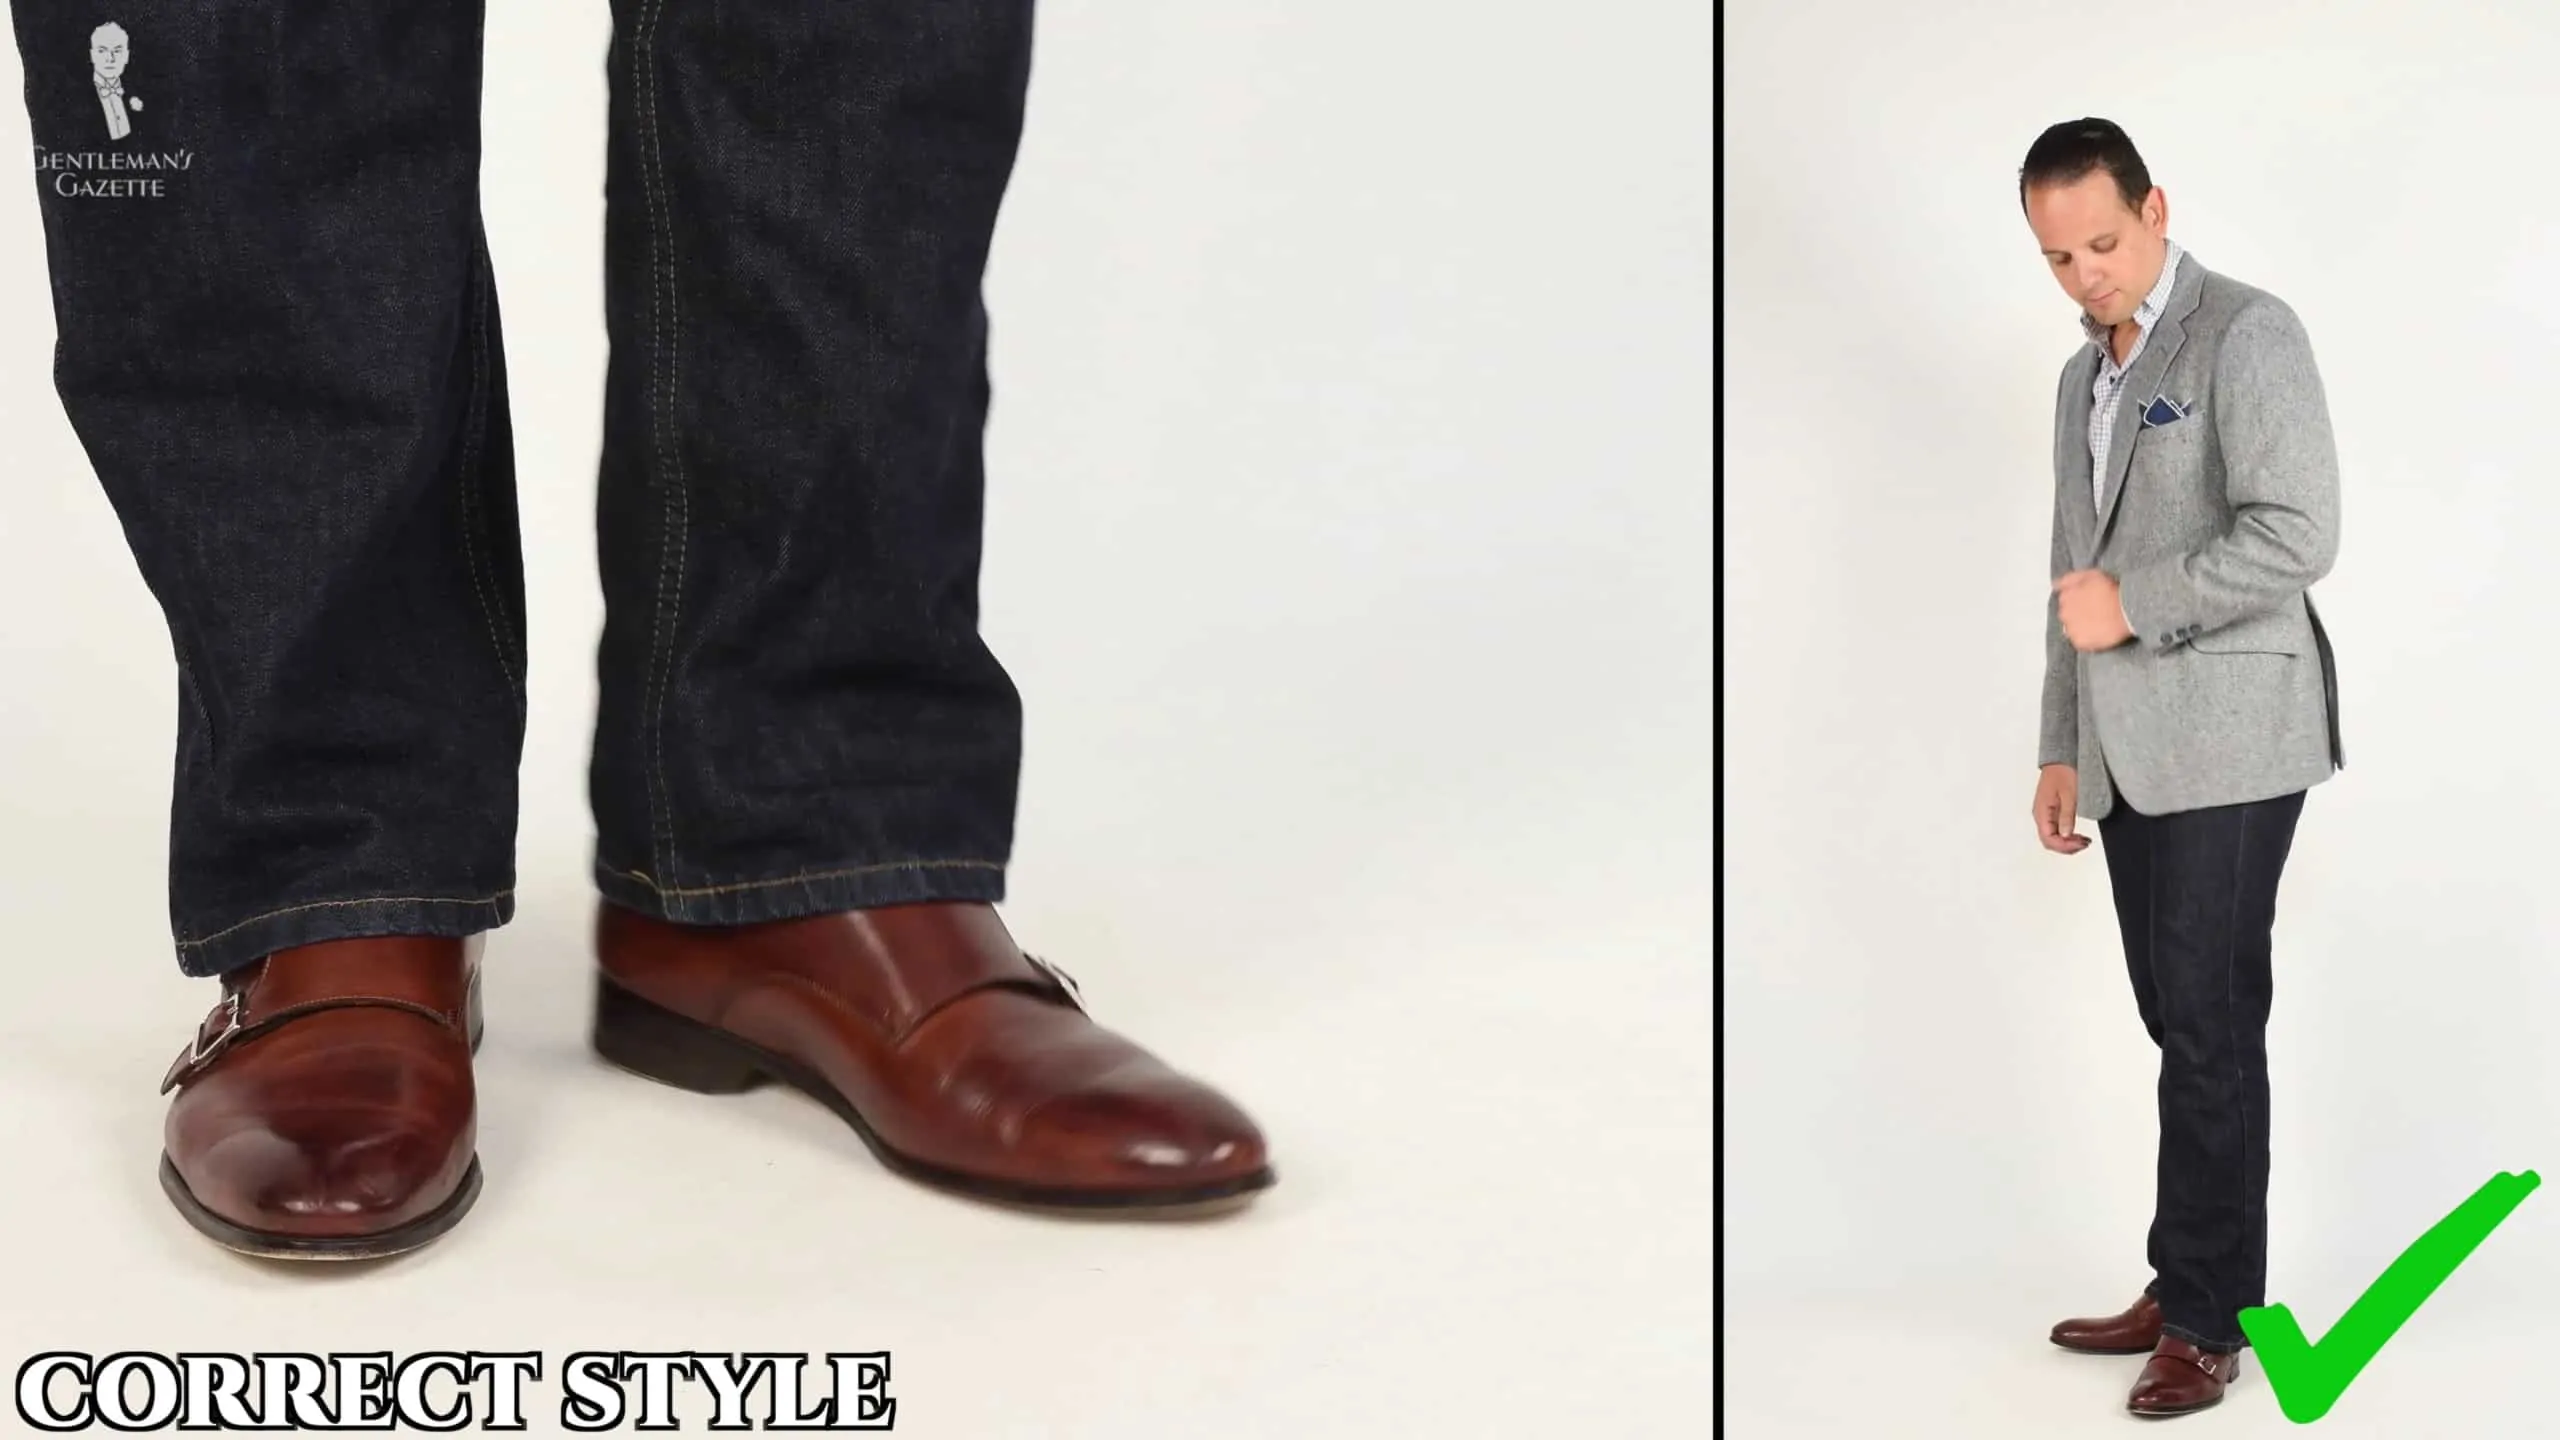 The Best Shoes To Wear With Jeans From Casual to Formal Styles   FashionBeans